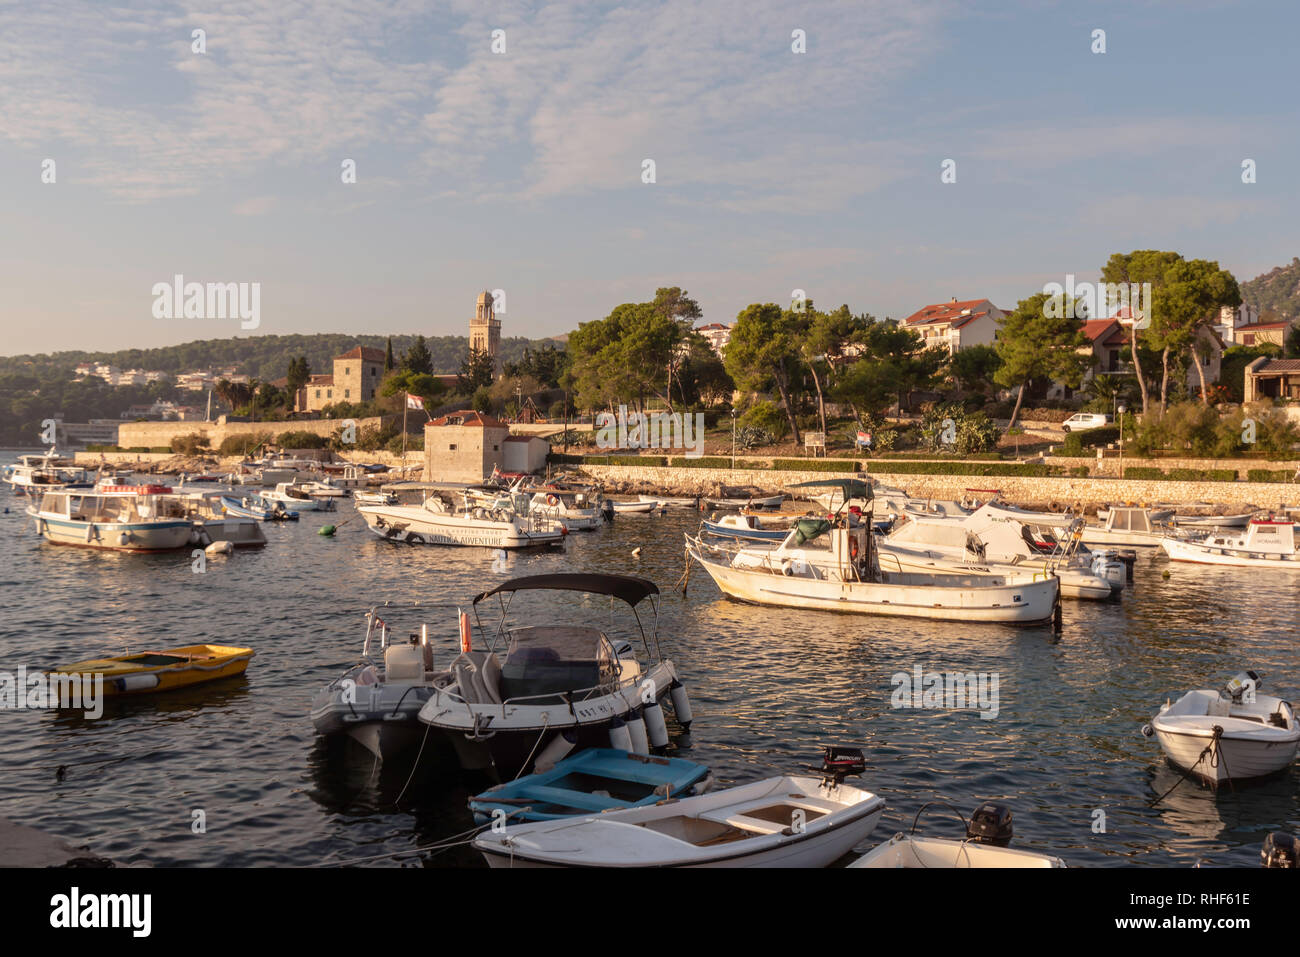 A view of the harbor in Hvar Town, Croatia Stock Photo